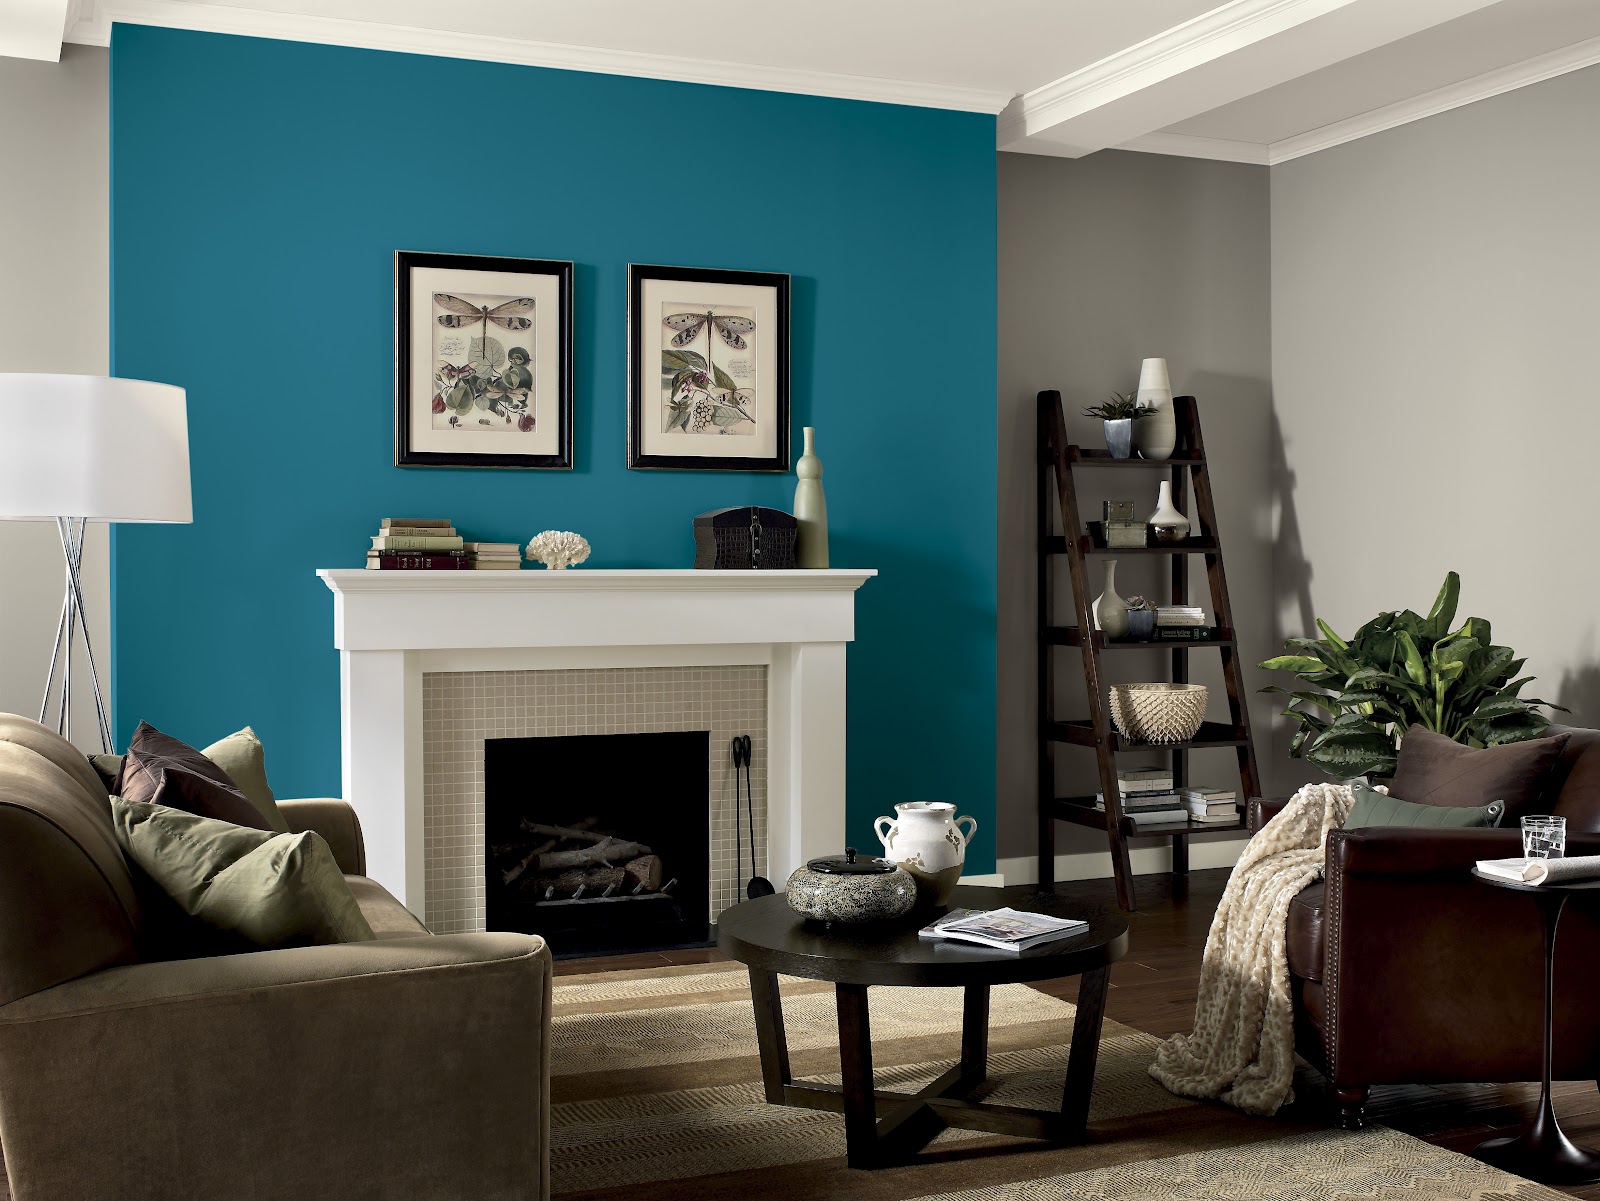 wall paint designs  accomplish with just a fresh coats of paint in a new color as well as